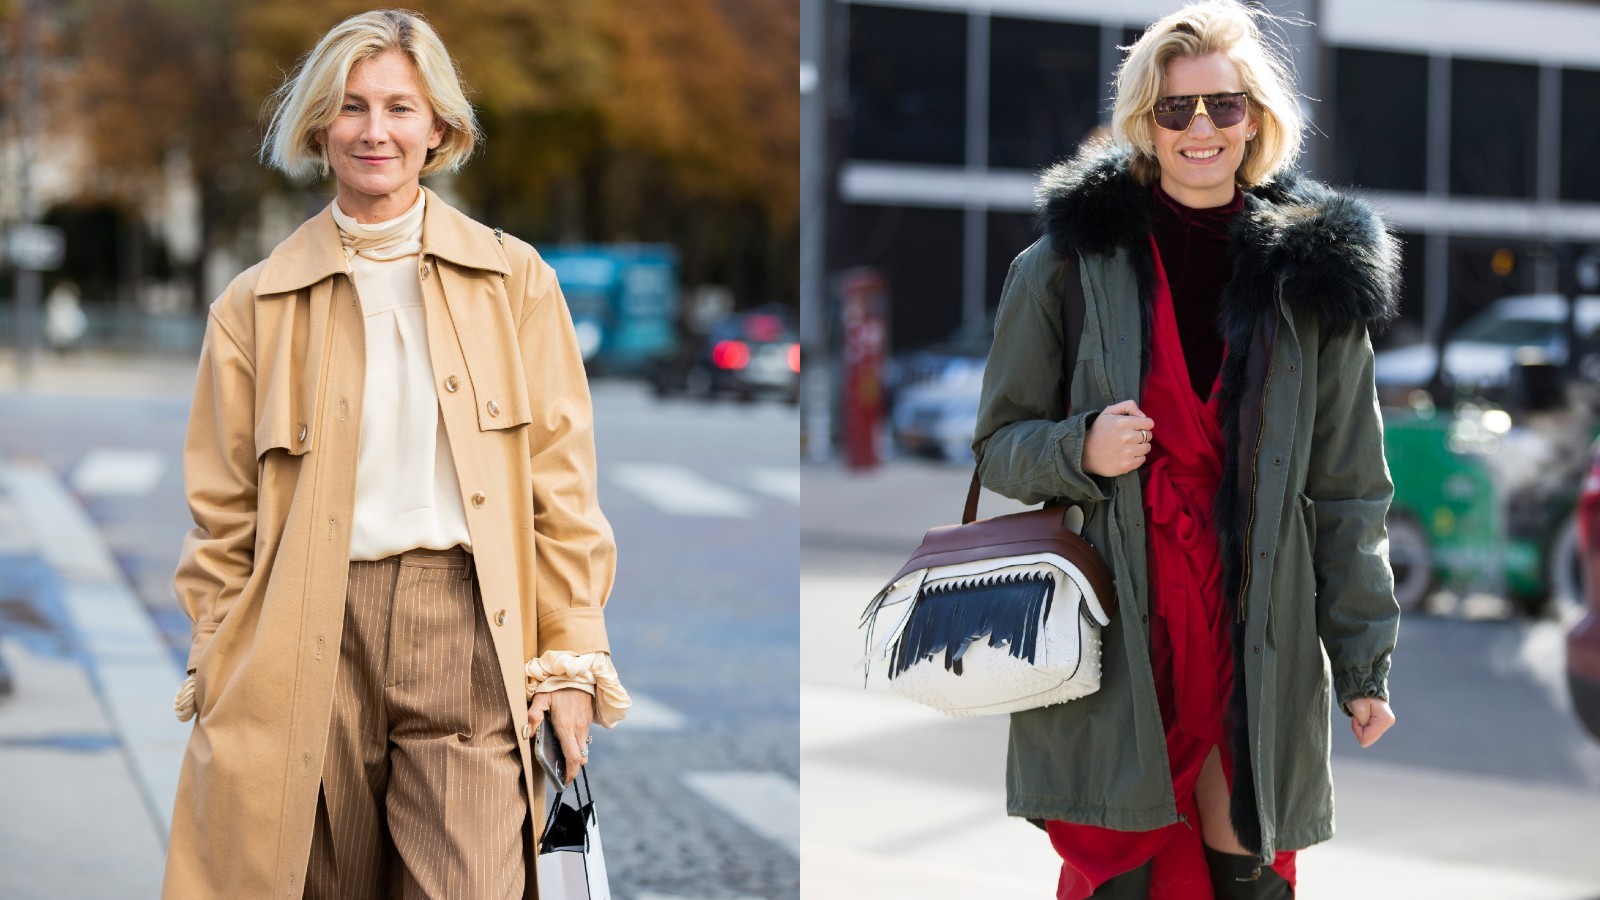 appel Buiten Bloemlezing The trench coat vs parka coat: Which one is best? | Woman & Home